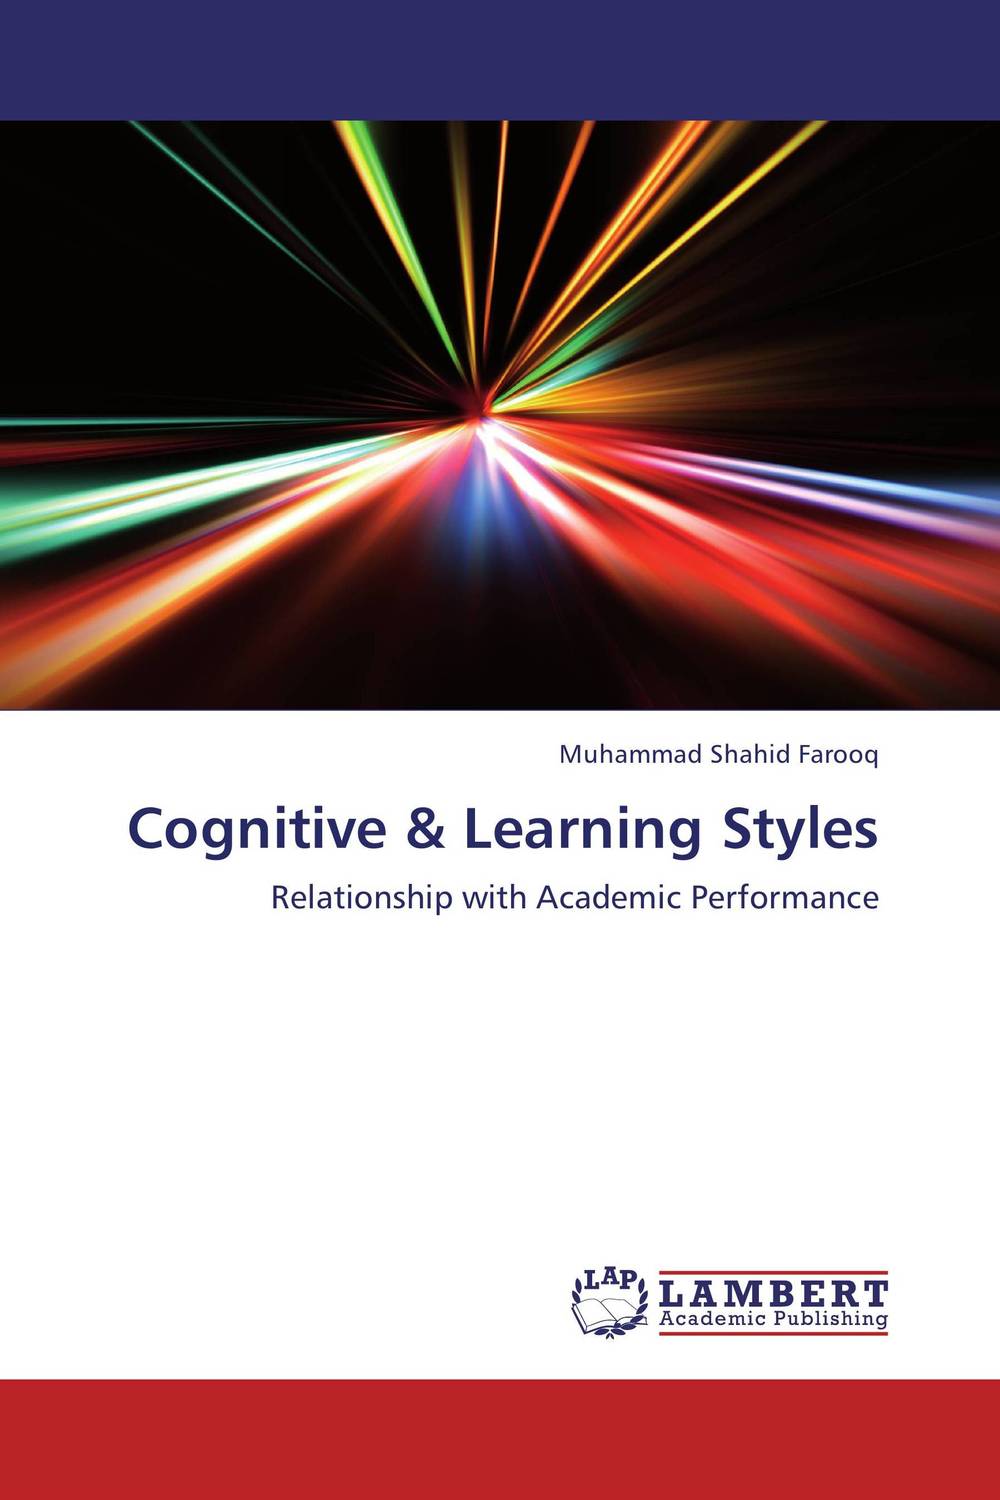 Cognitive & Learning Styles